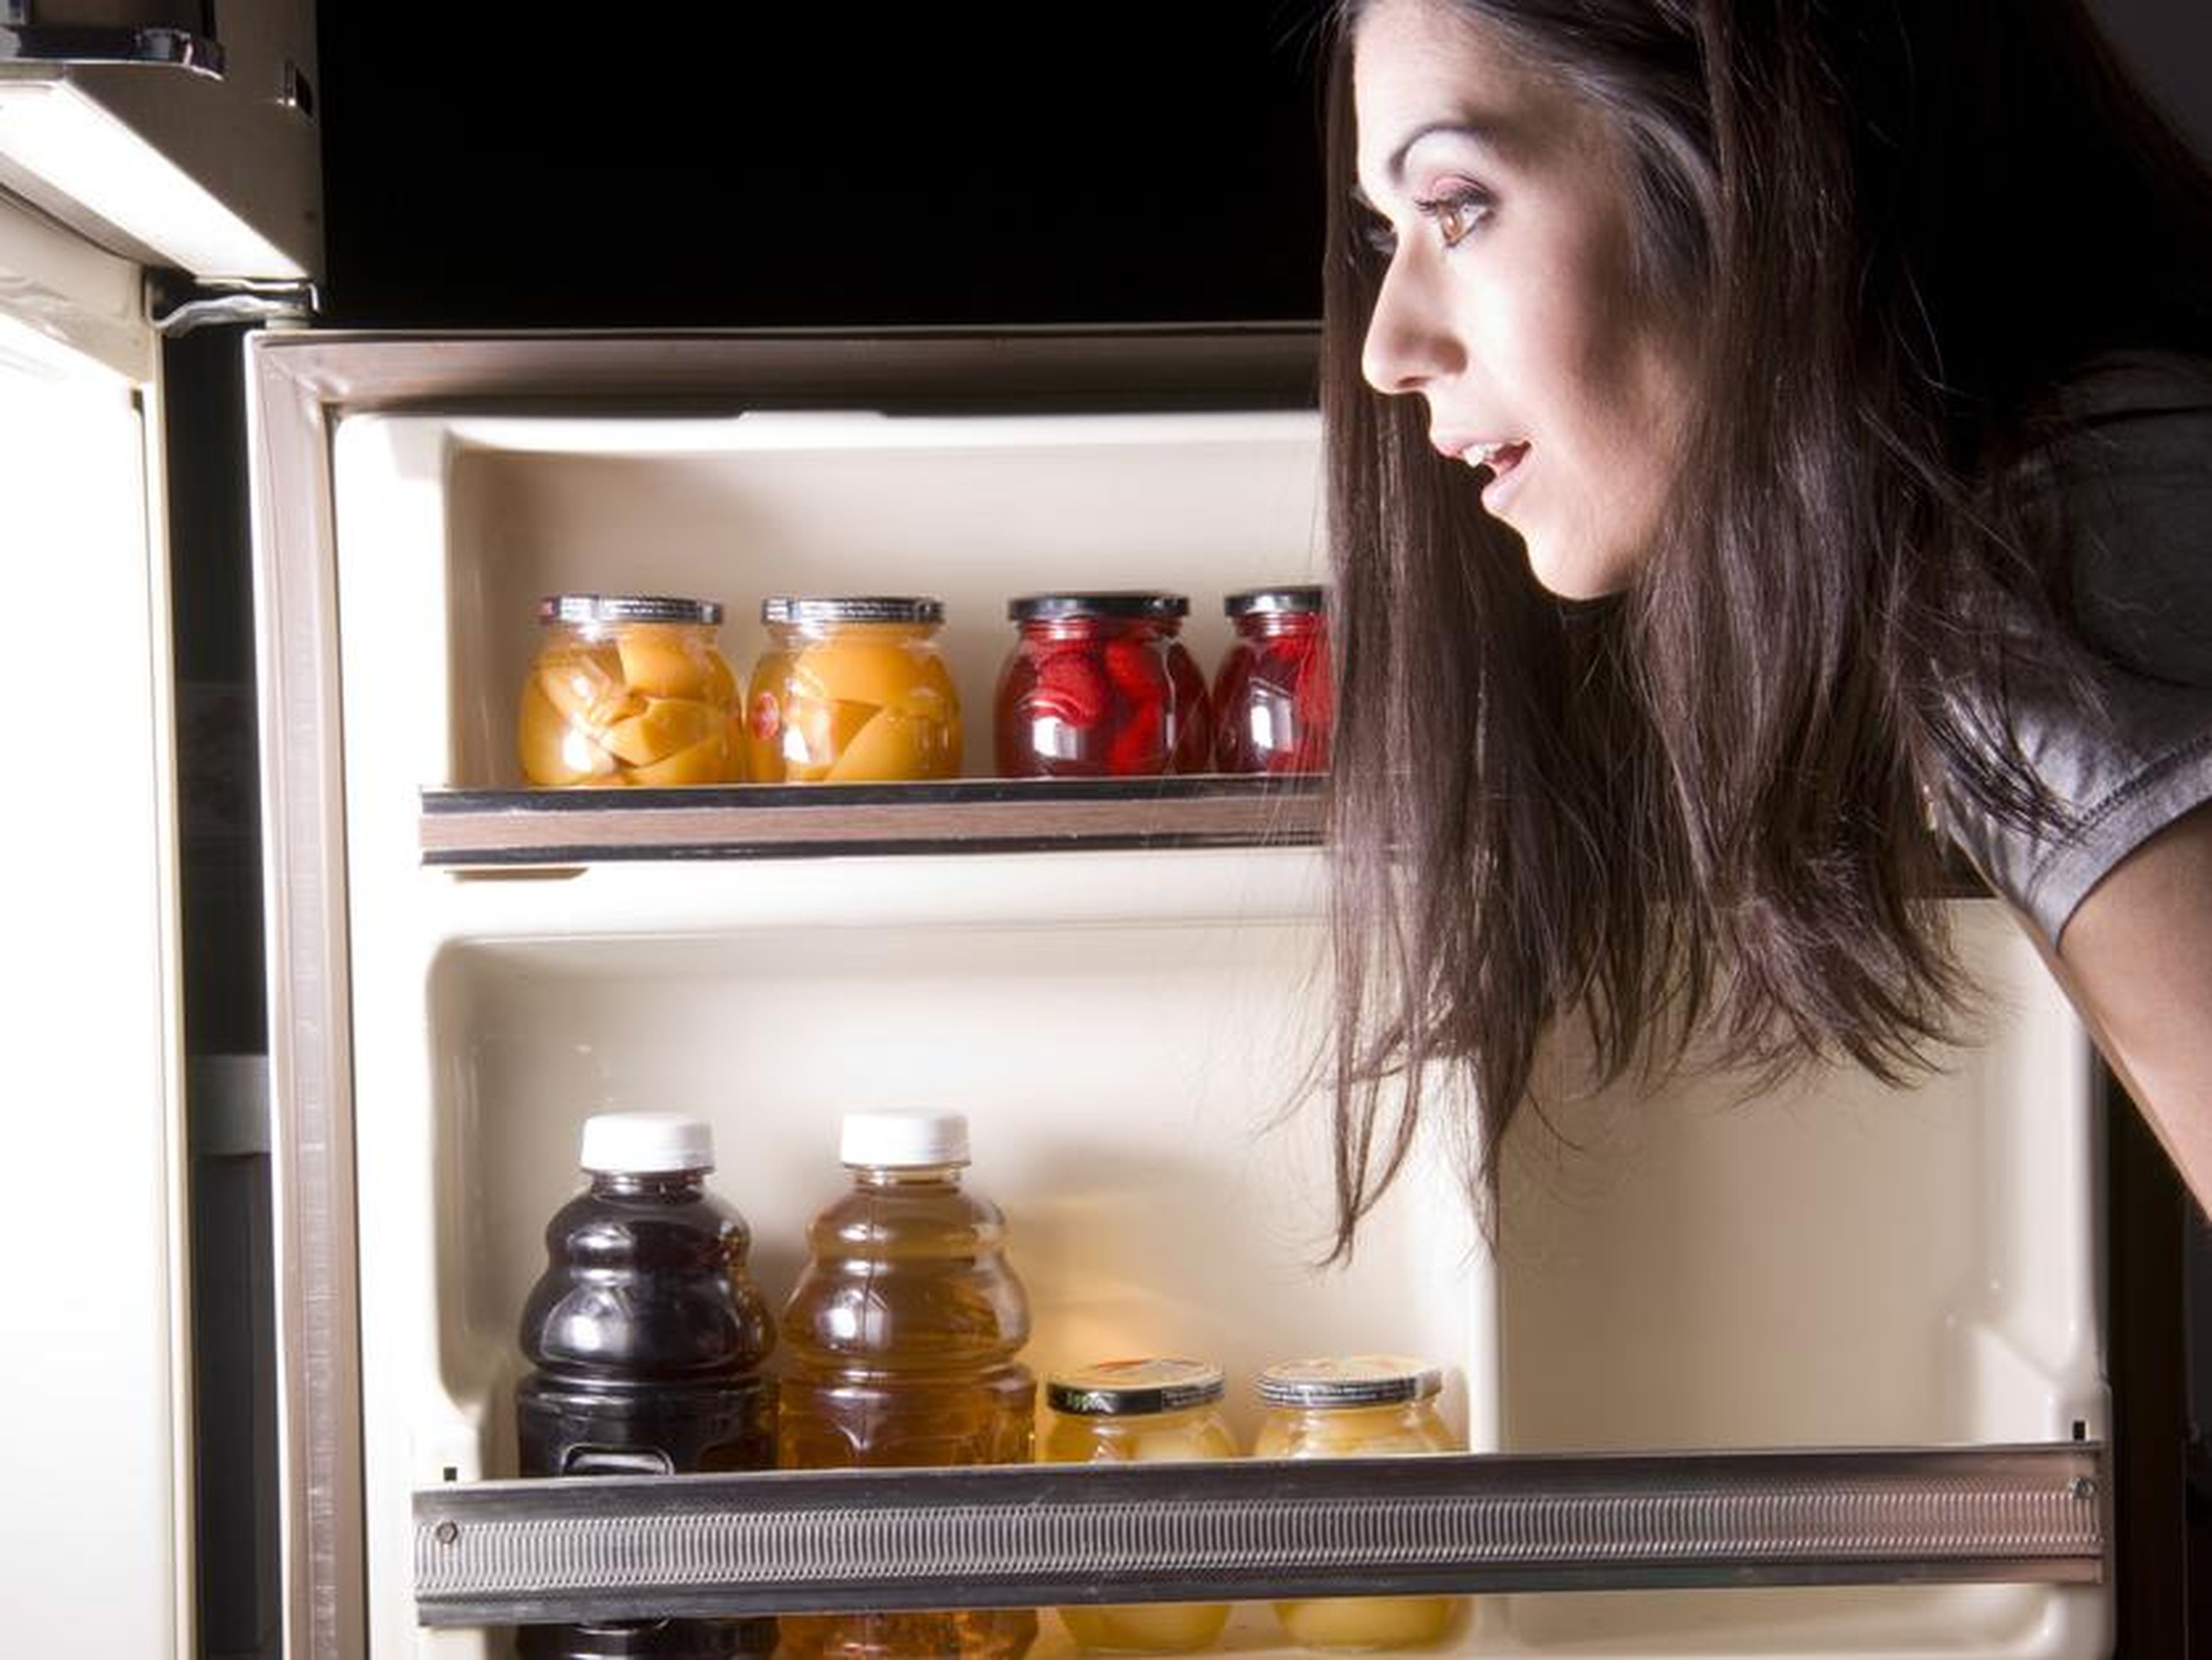 Expiration dates are a sham. Here's the best way to tell if a food has gone bad.